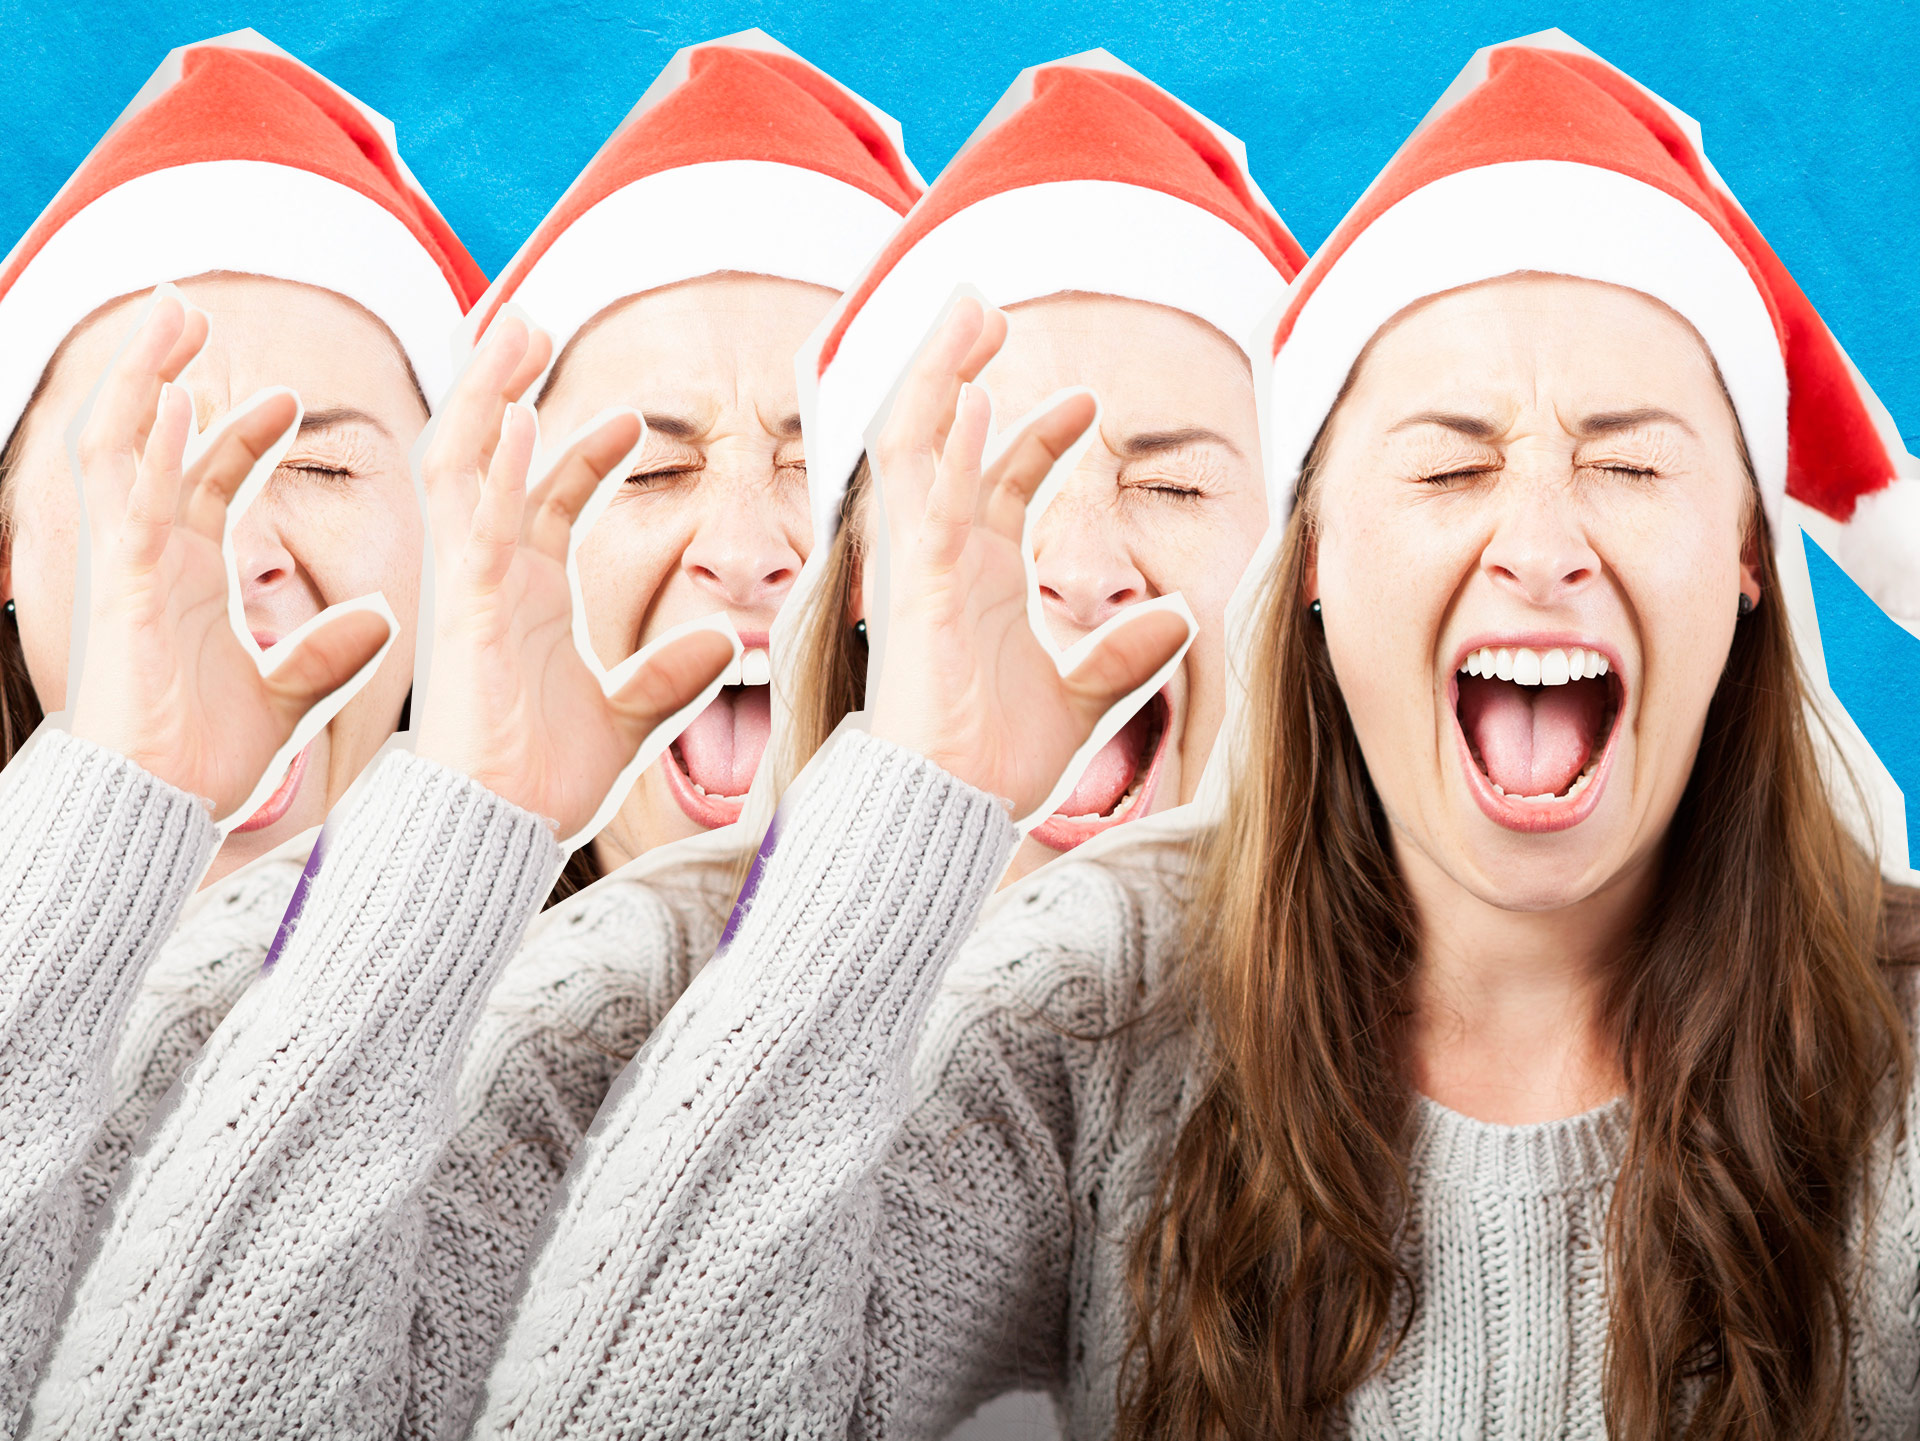 7 ways to stay calm this Christmas